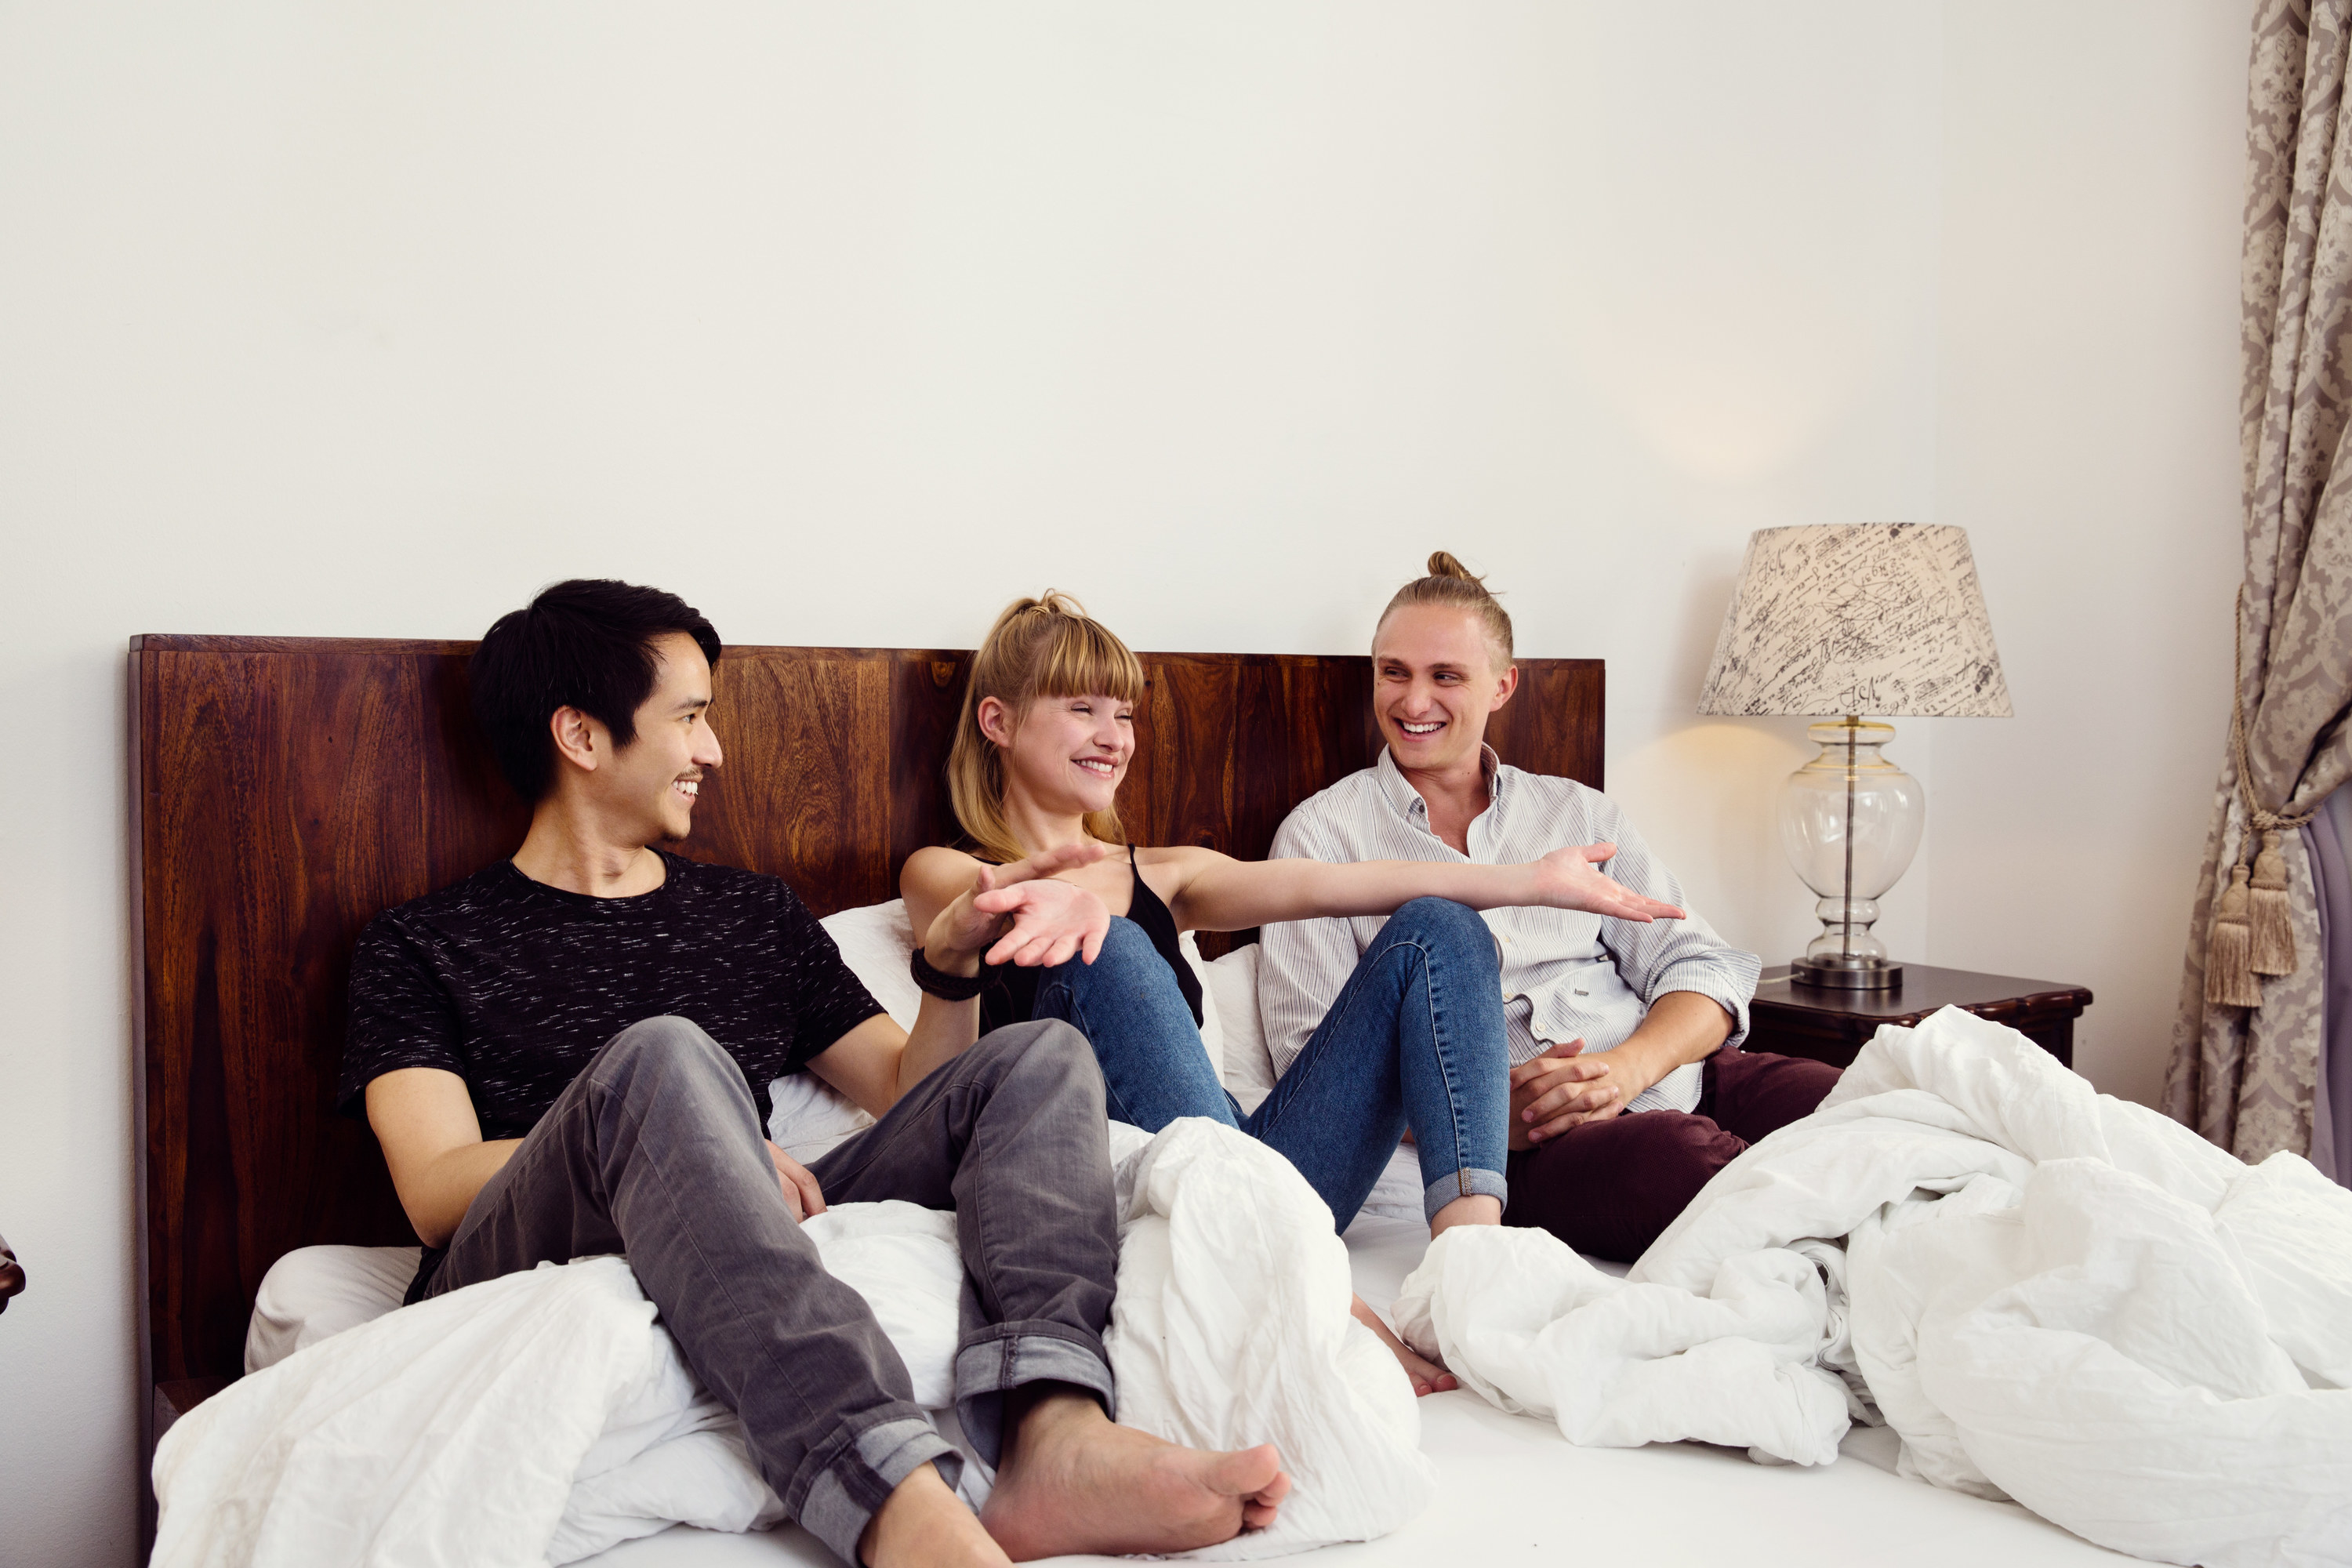 Three dressed people sitting in bed